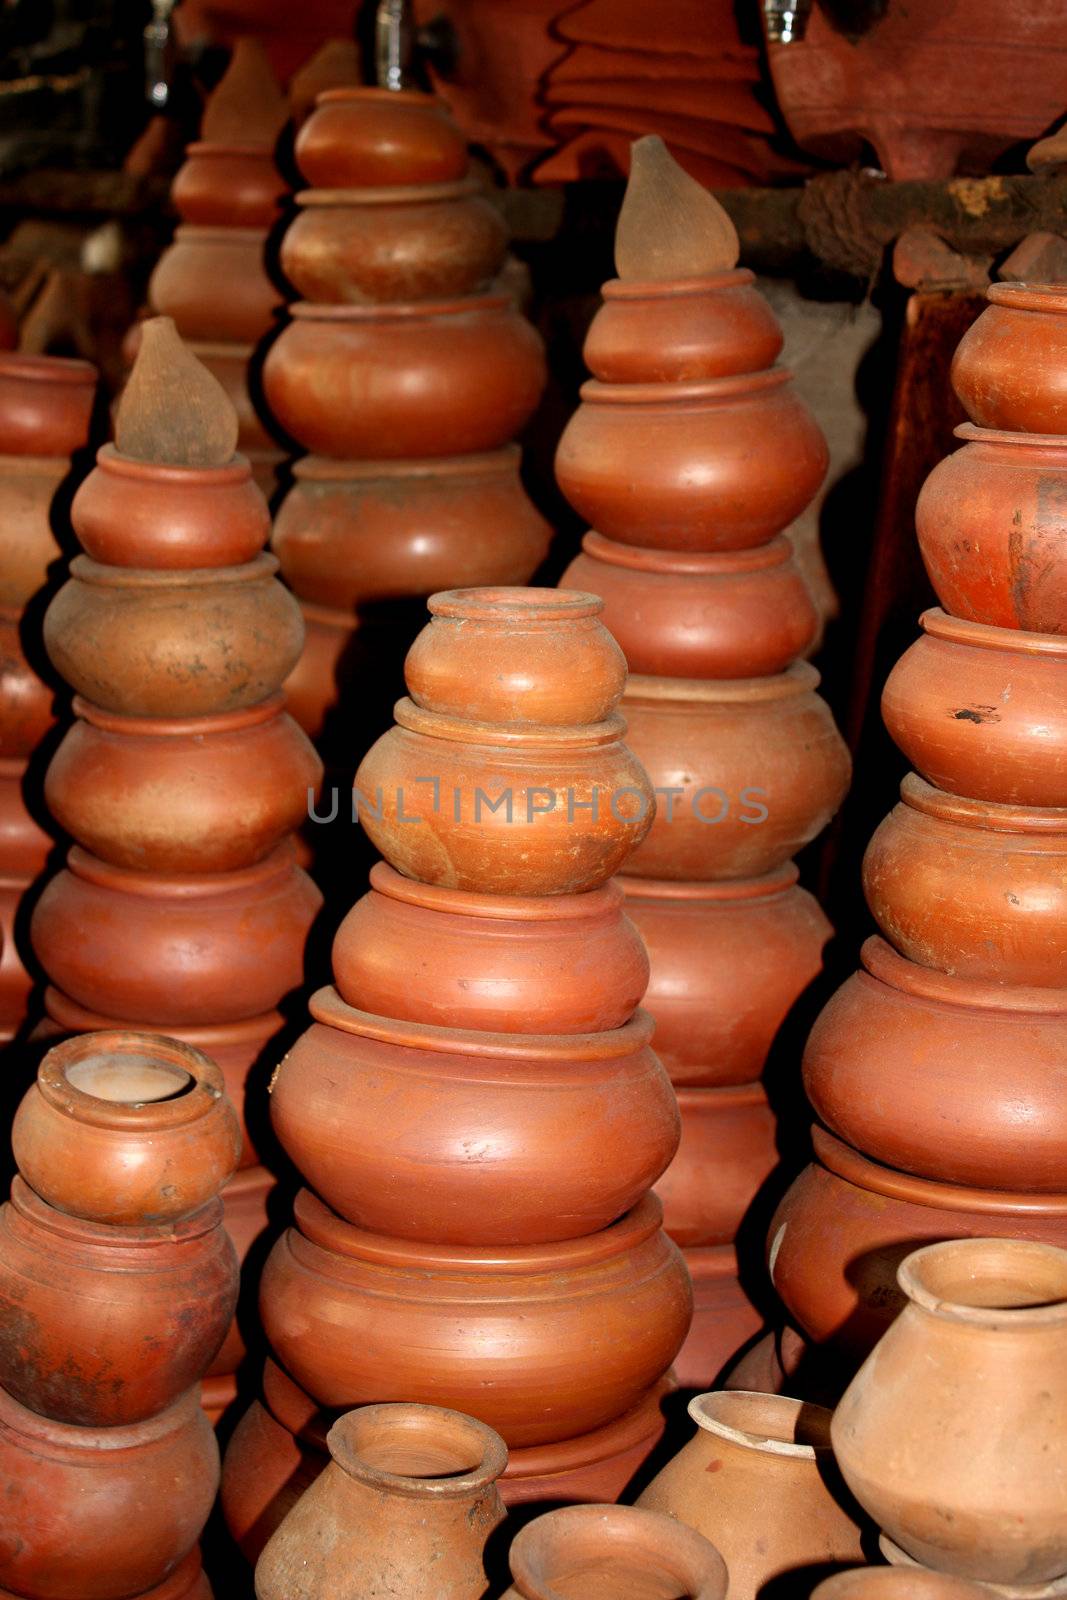 Different clay plots on display at a potters shop.